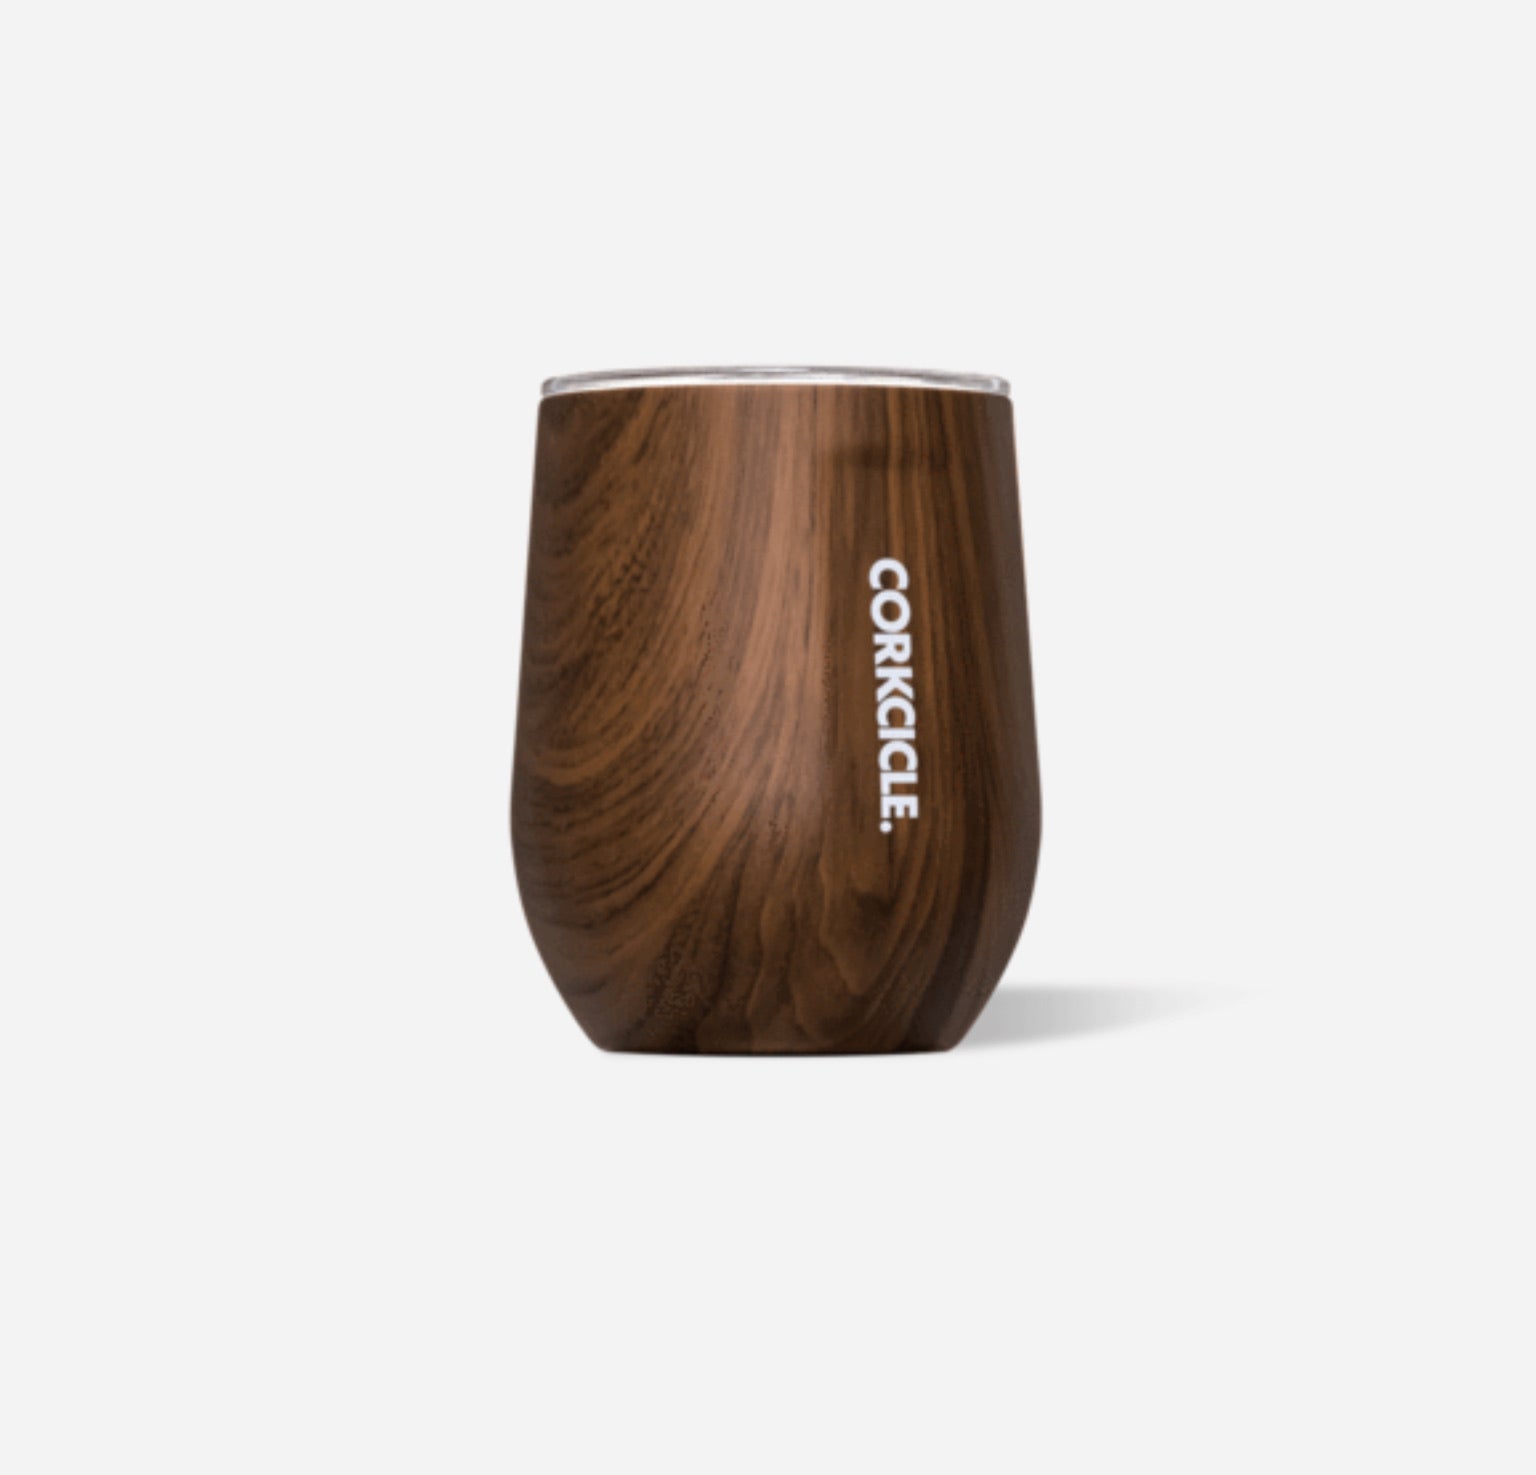 Corkcicle wood stemless